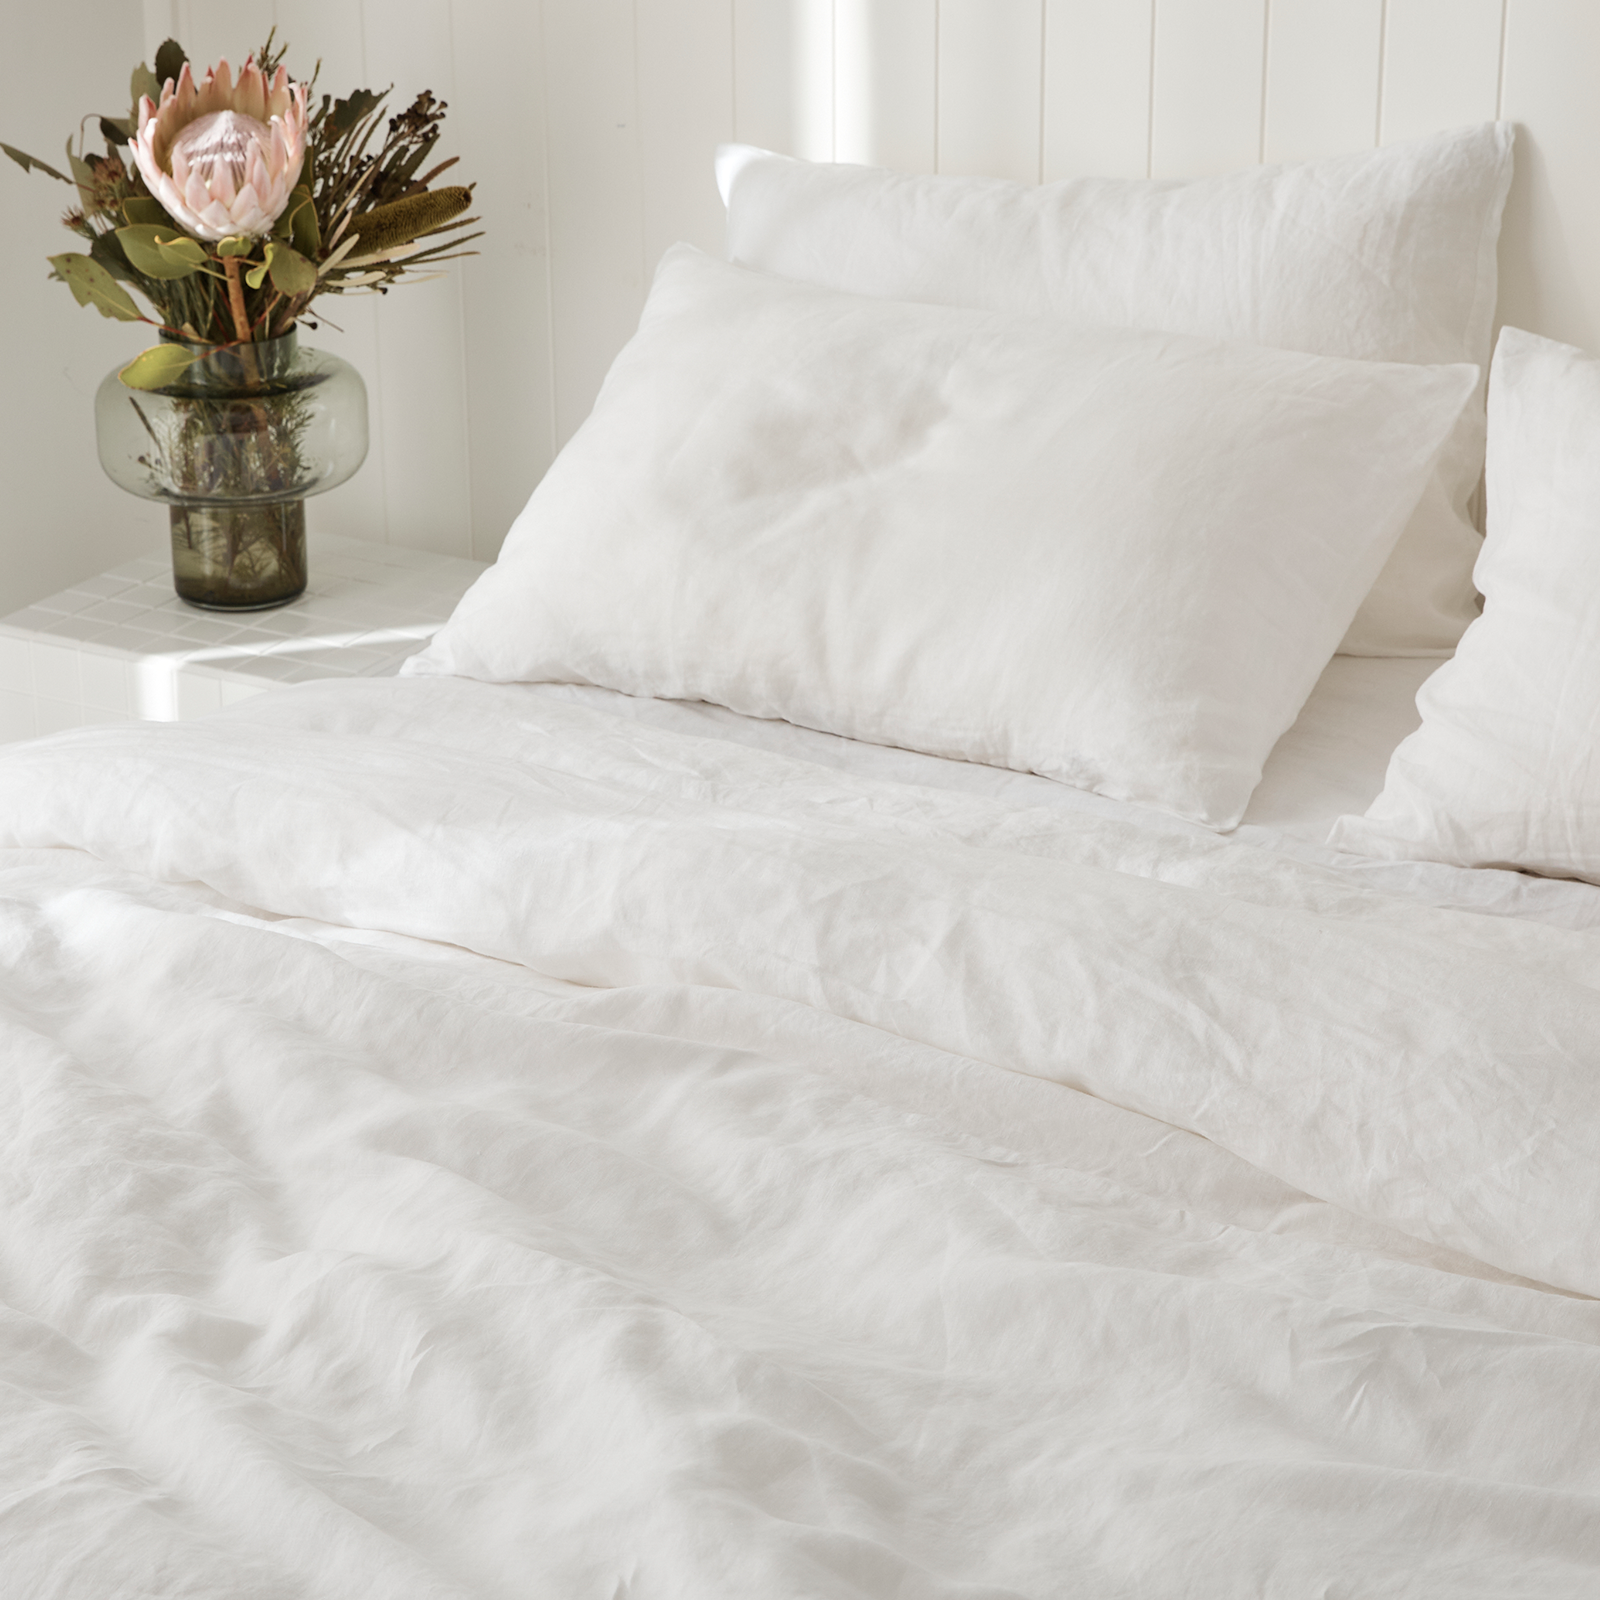 100% pure French linen Duvet Cover in White